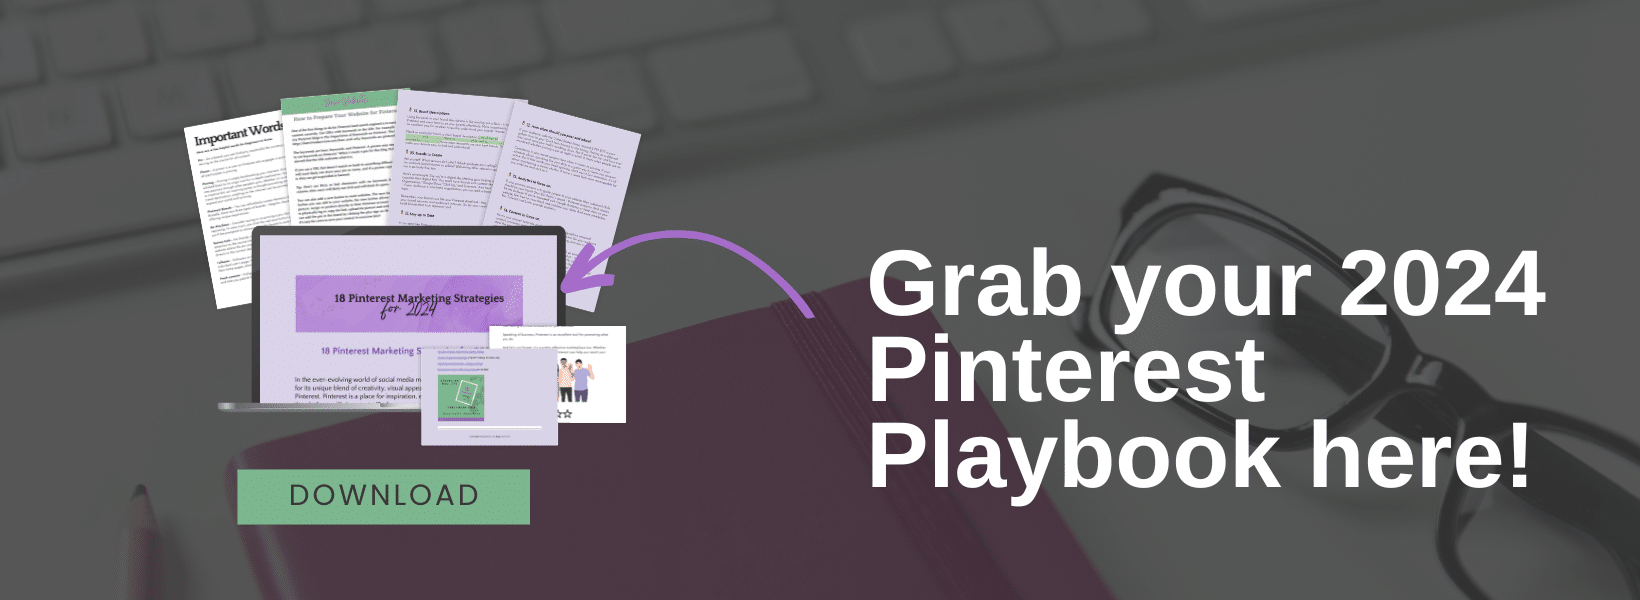 Grab your 2024 Pinterest Playbook here!